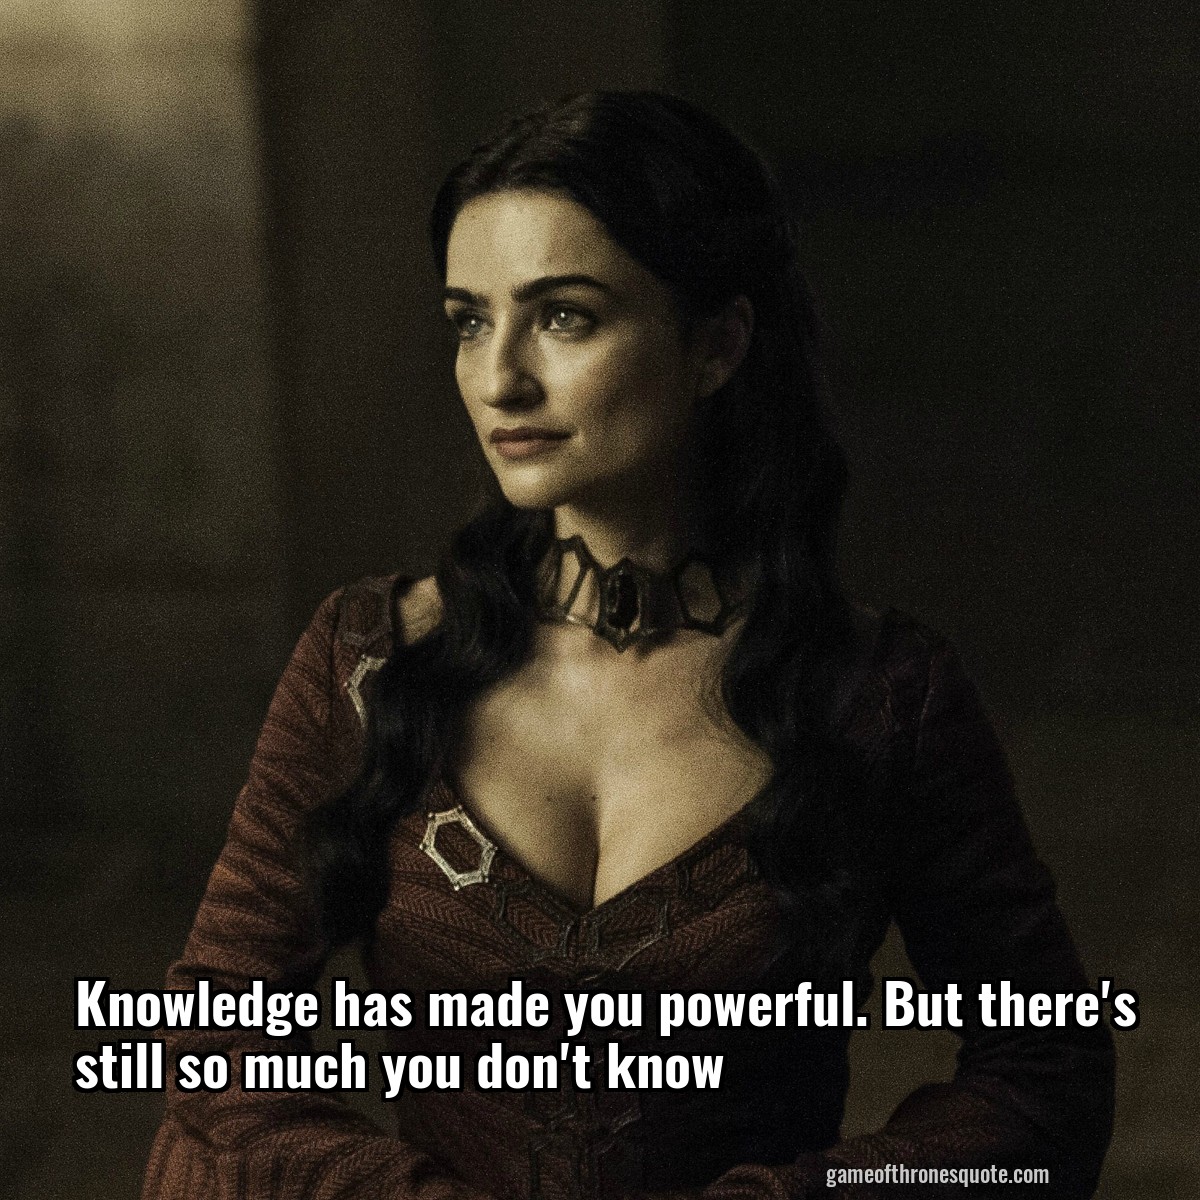 Knowledge has made you powerful. But there's still so much you don't know